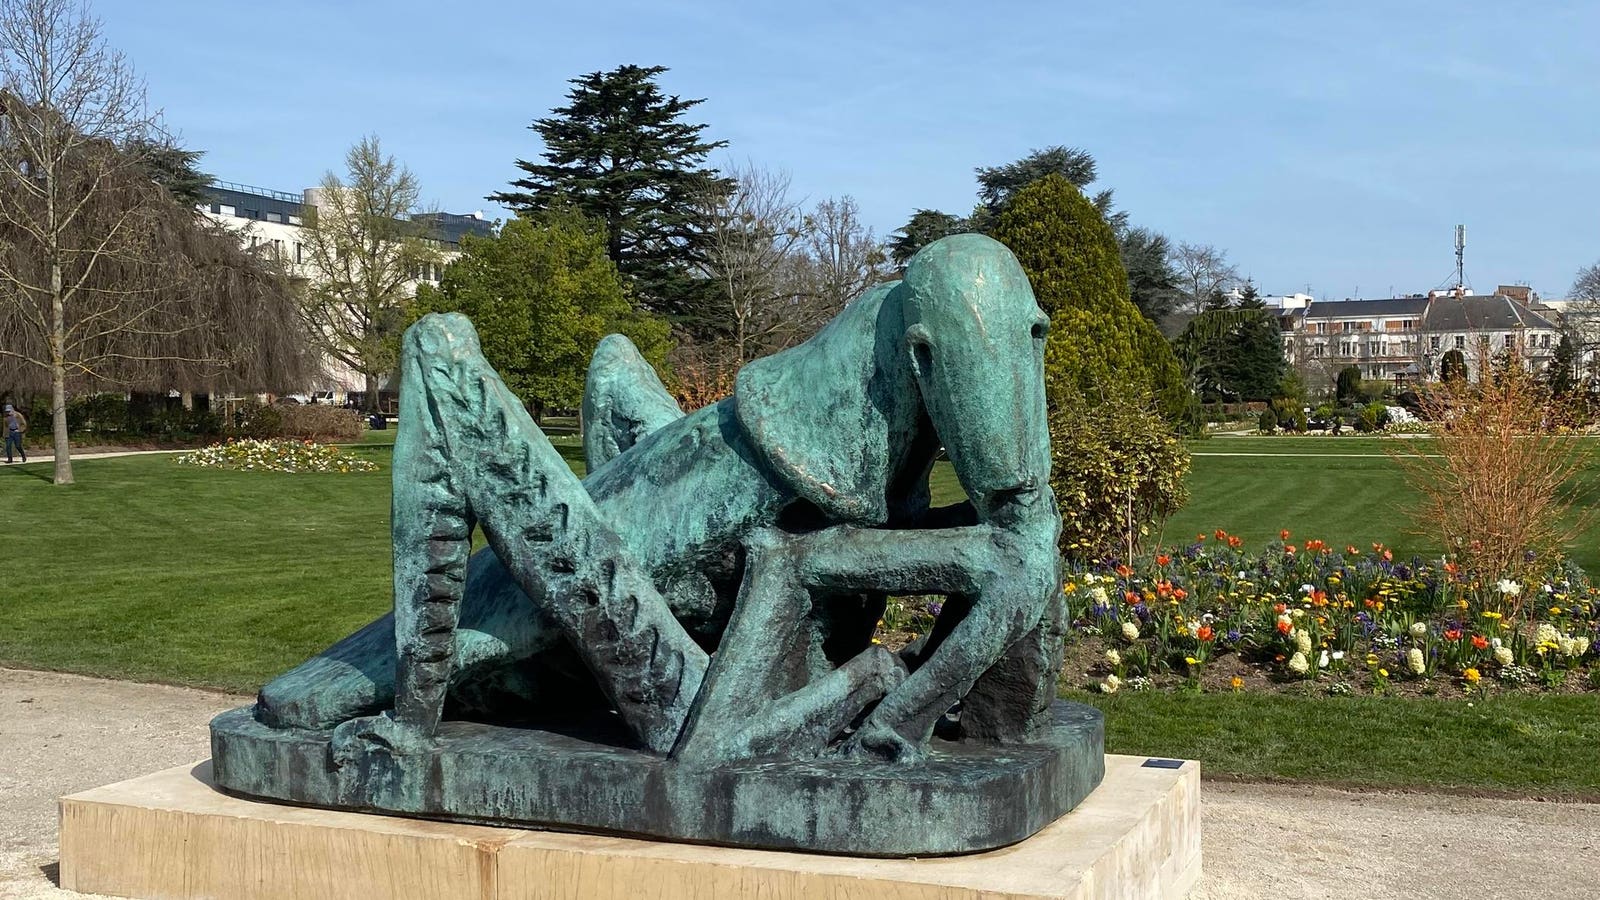 This Belgian Sculptor Brings His Mythical Bestiary To The Streets Of Orléans